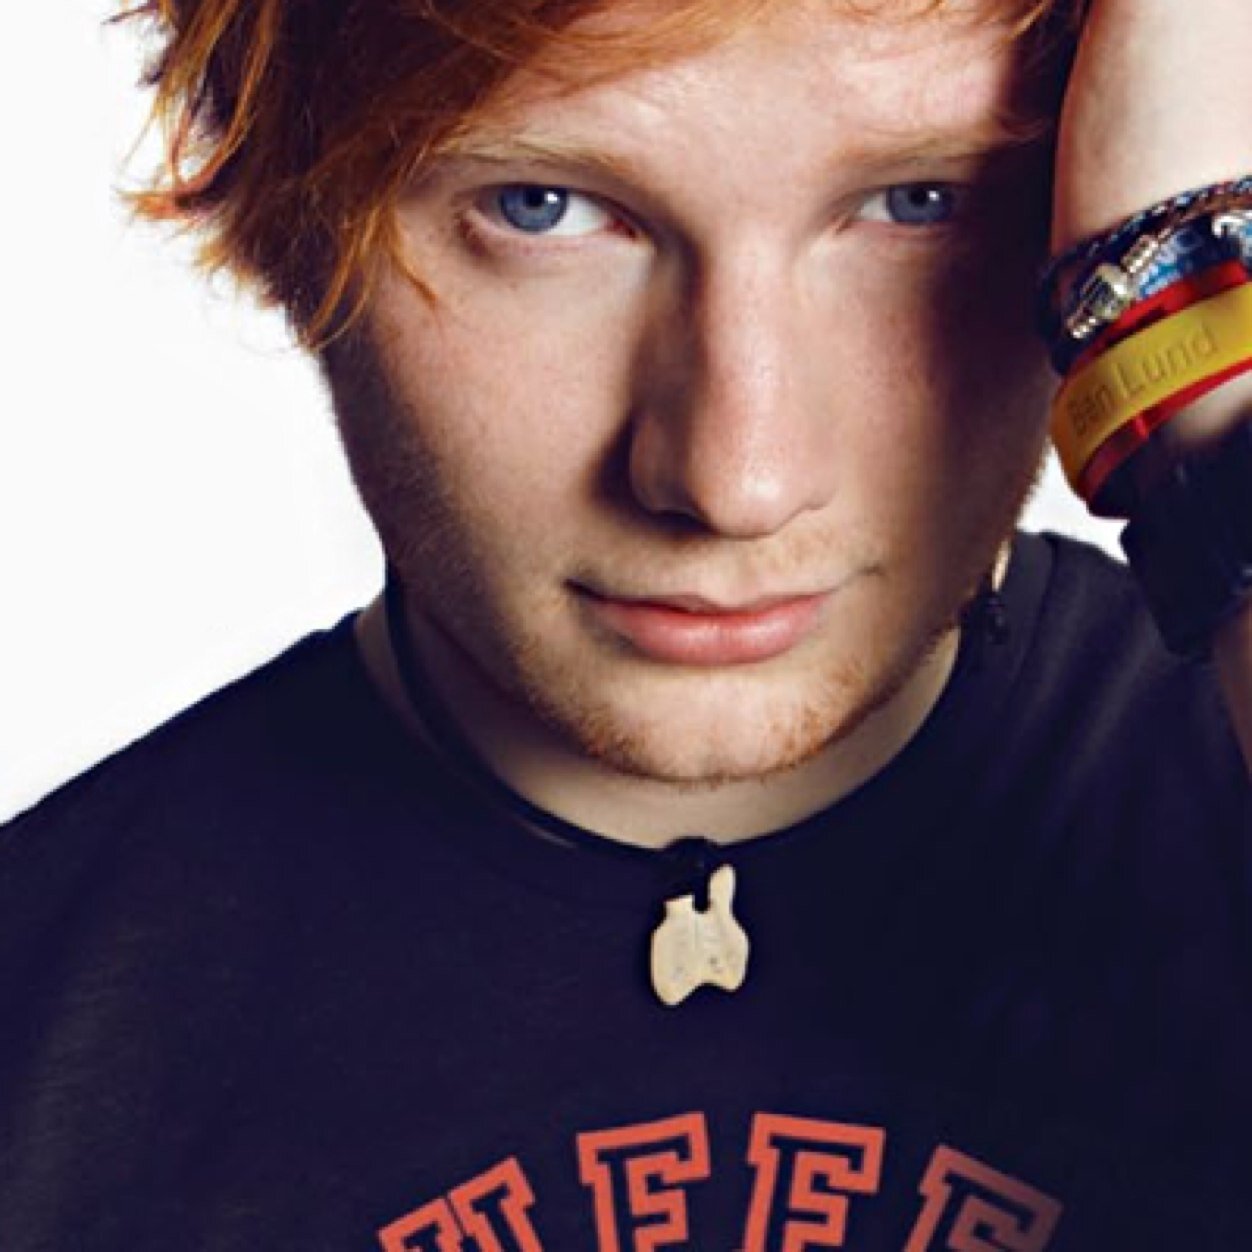 This page is just Ed Sheeran xx